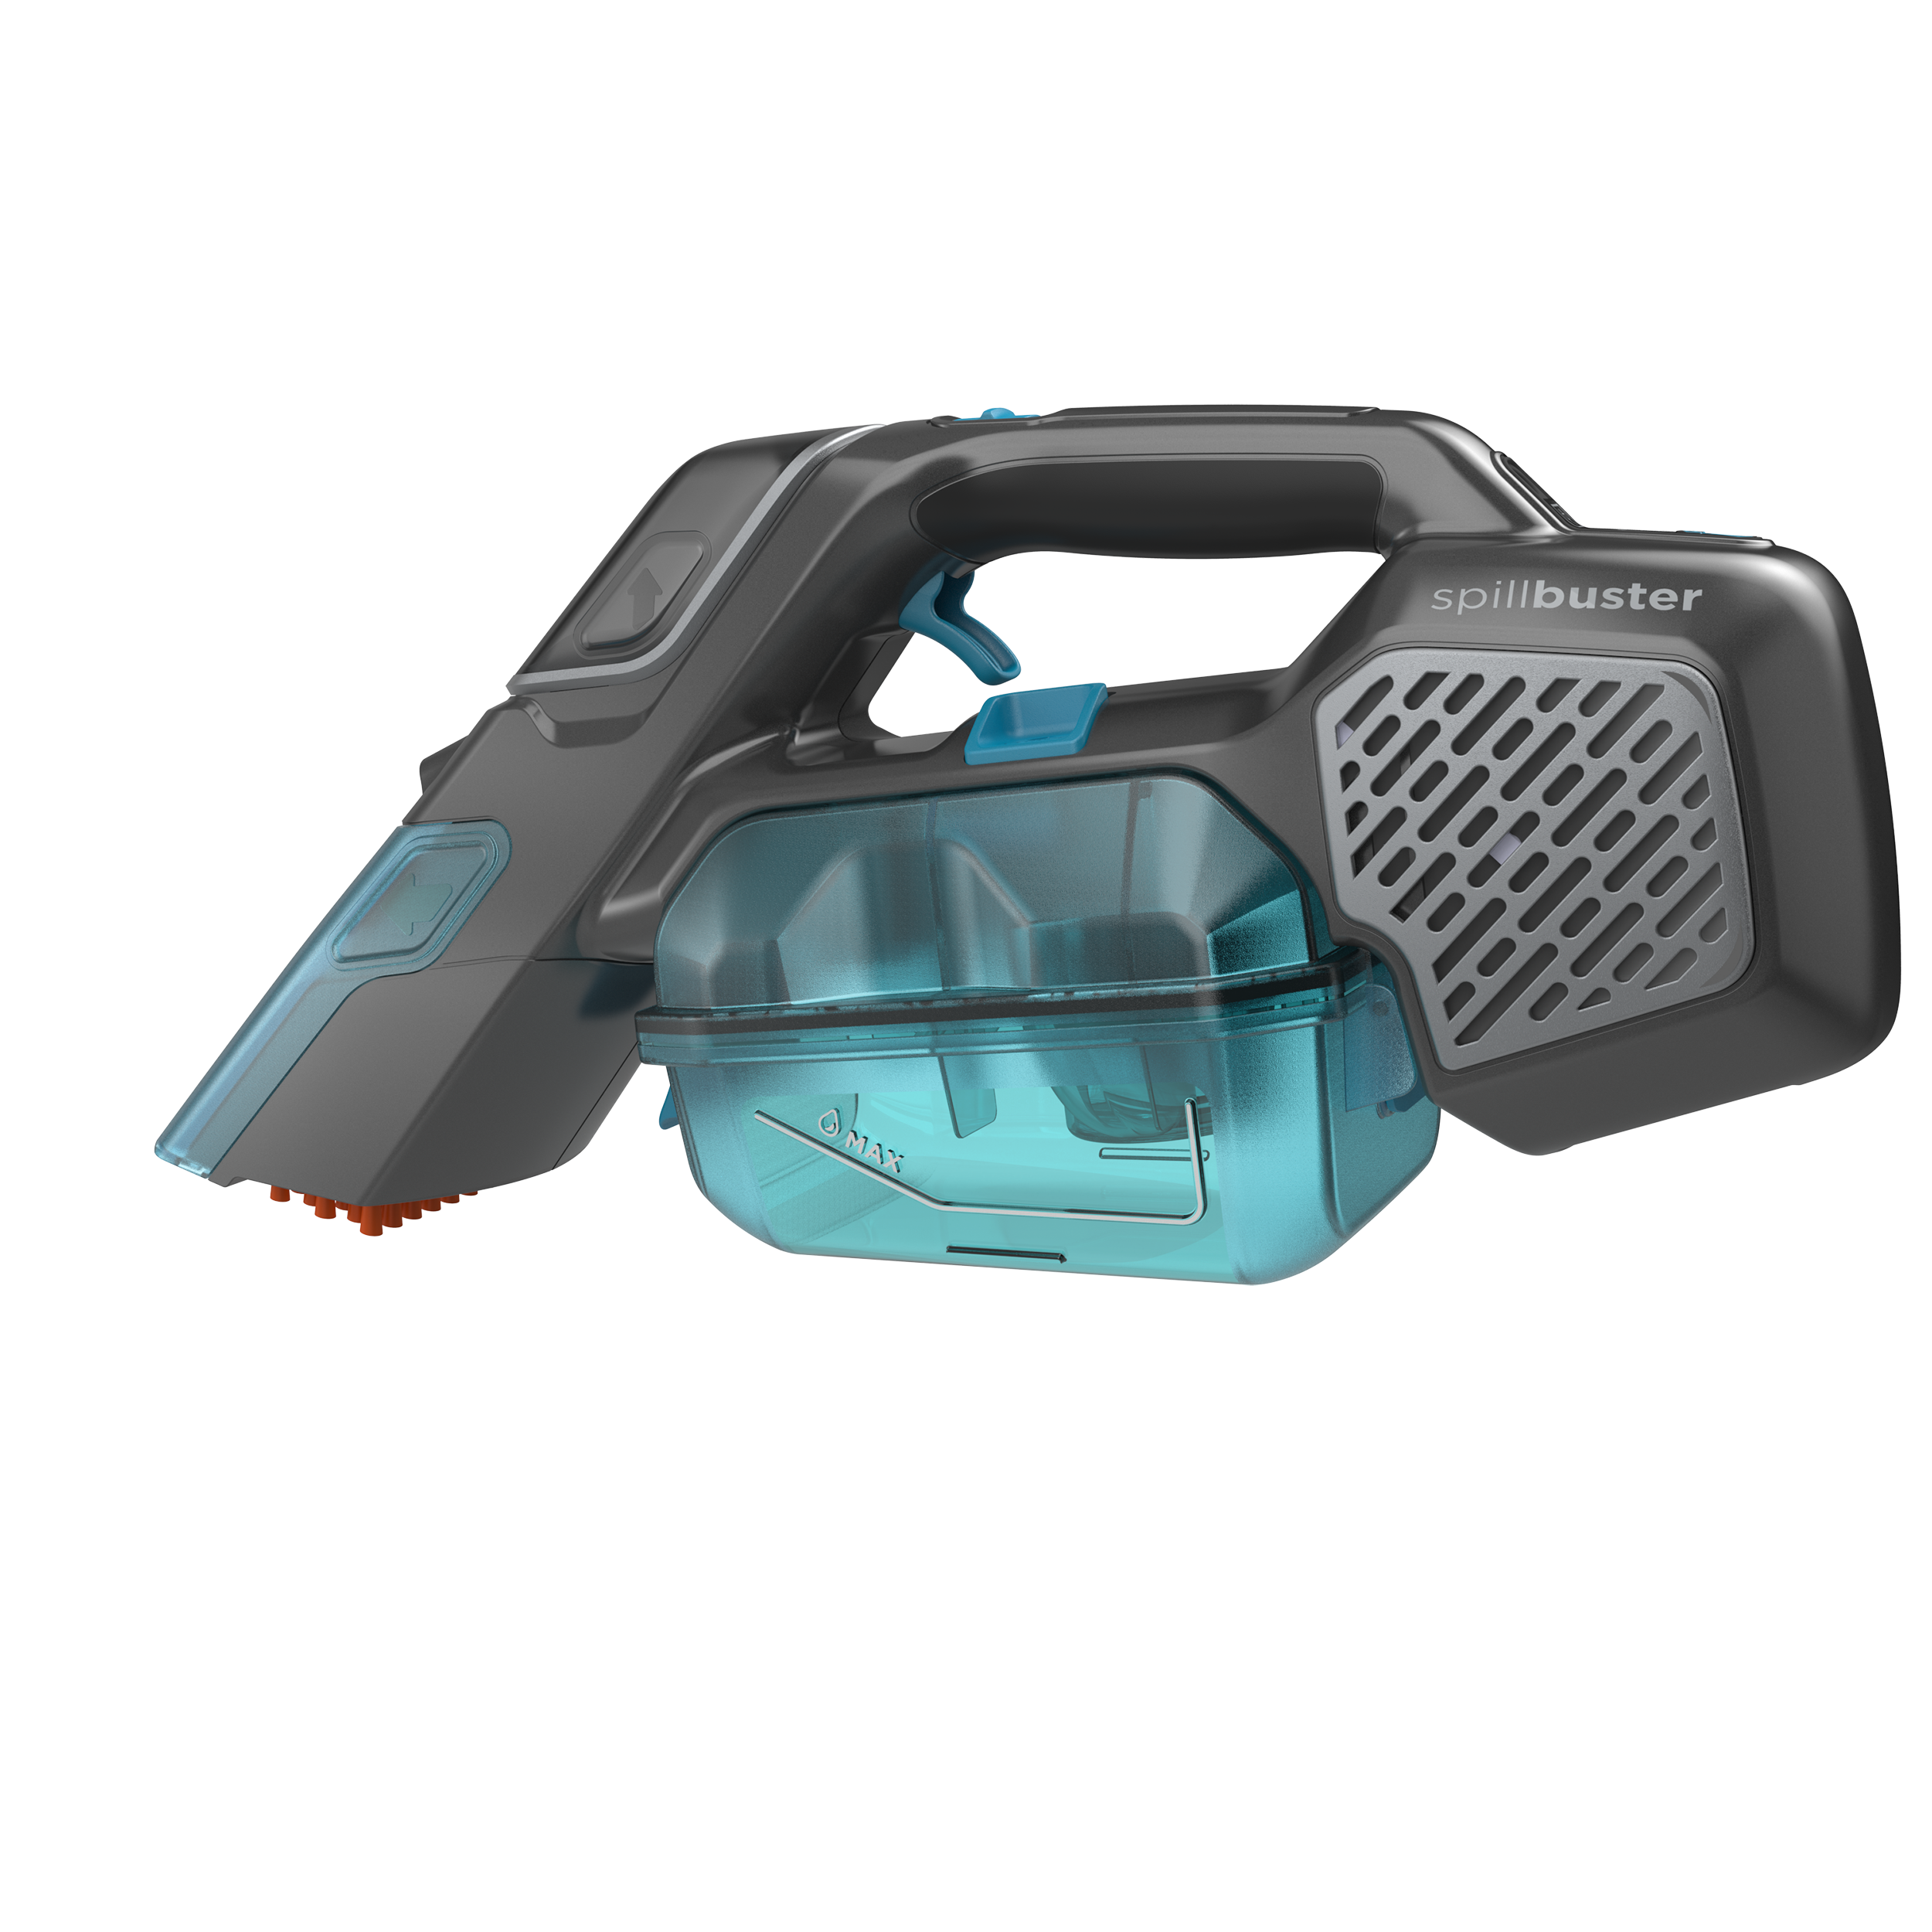 File:Spill Buster Black and Decker.JPG - Wikipedia